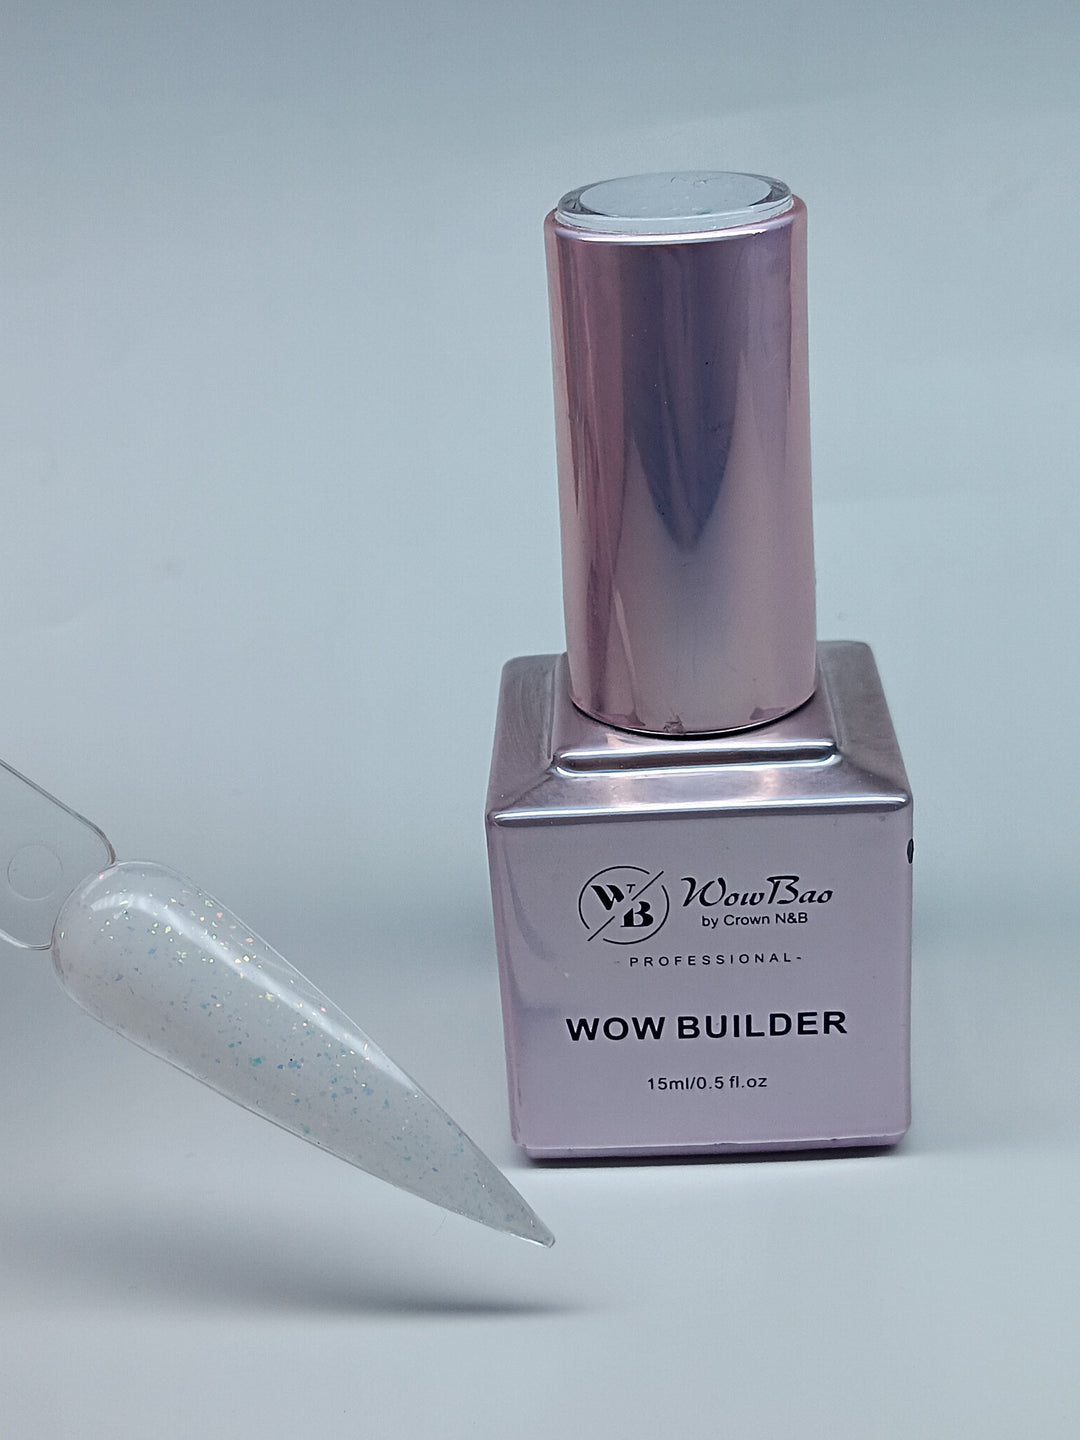 WowBao Nails BIB11 Angel Wings WOW brush on Builder in a bottle